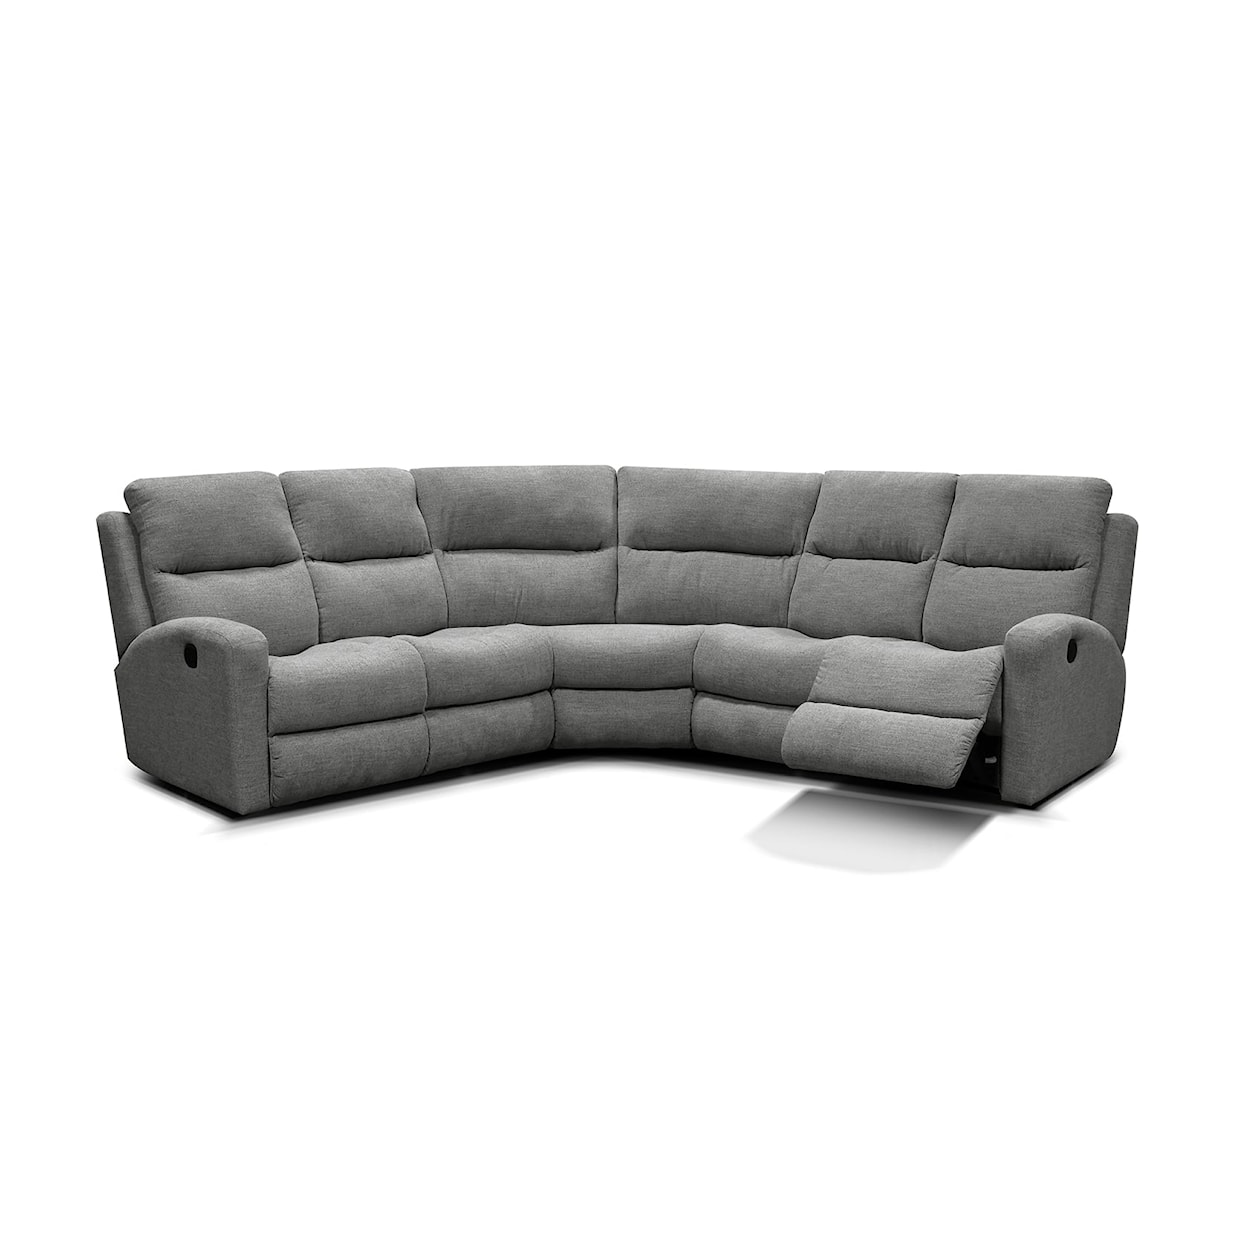 Tennessee Custom Upholstery EZ2600 Series 3-Piece Reclining Sectional Sofa